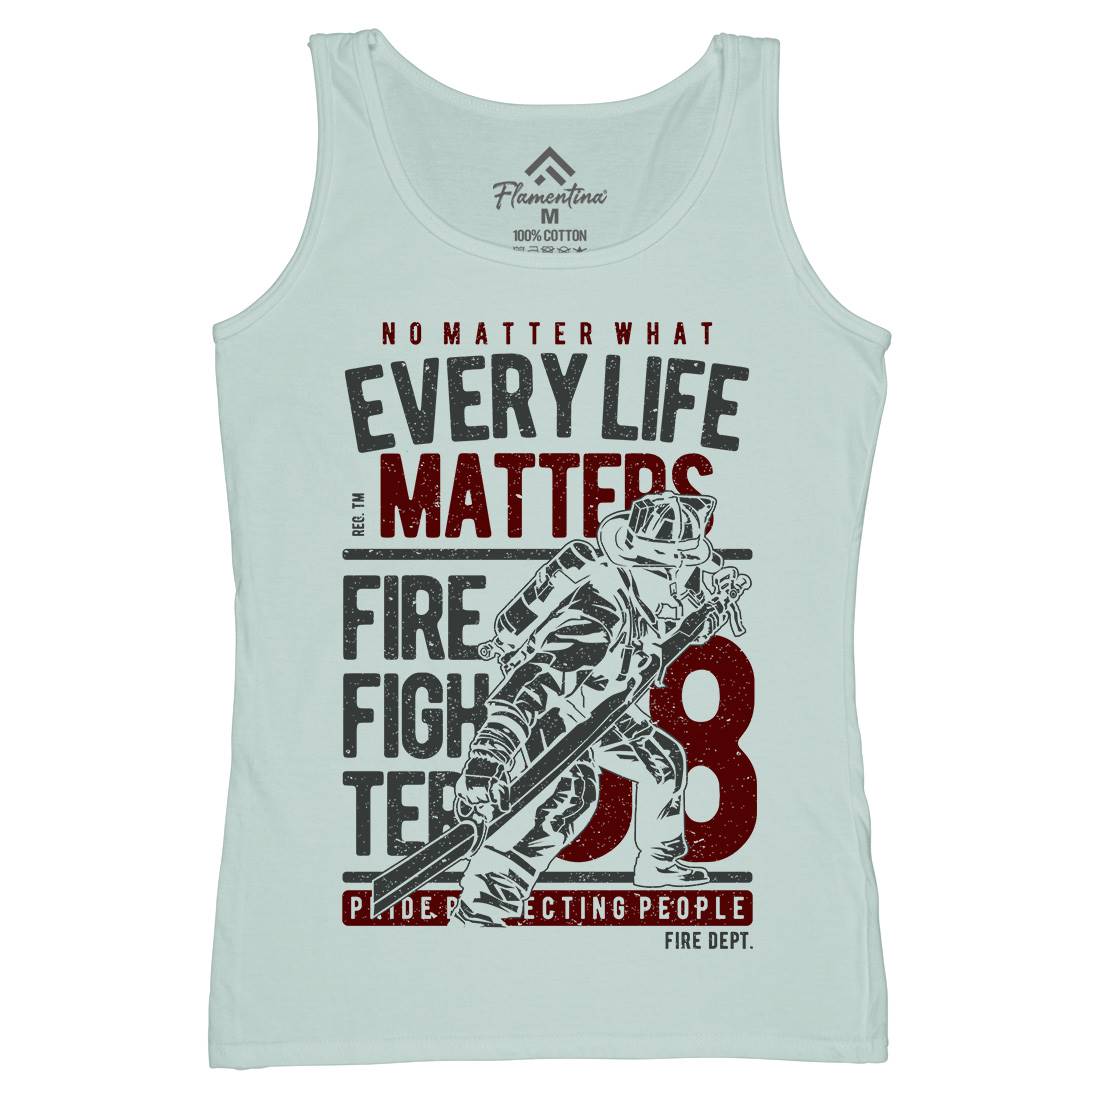 Every Life Matters Womens Organic Tank Top Vest Firefighters A650